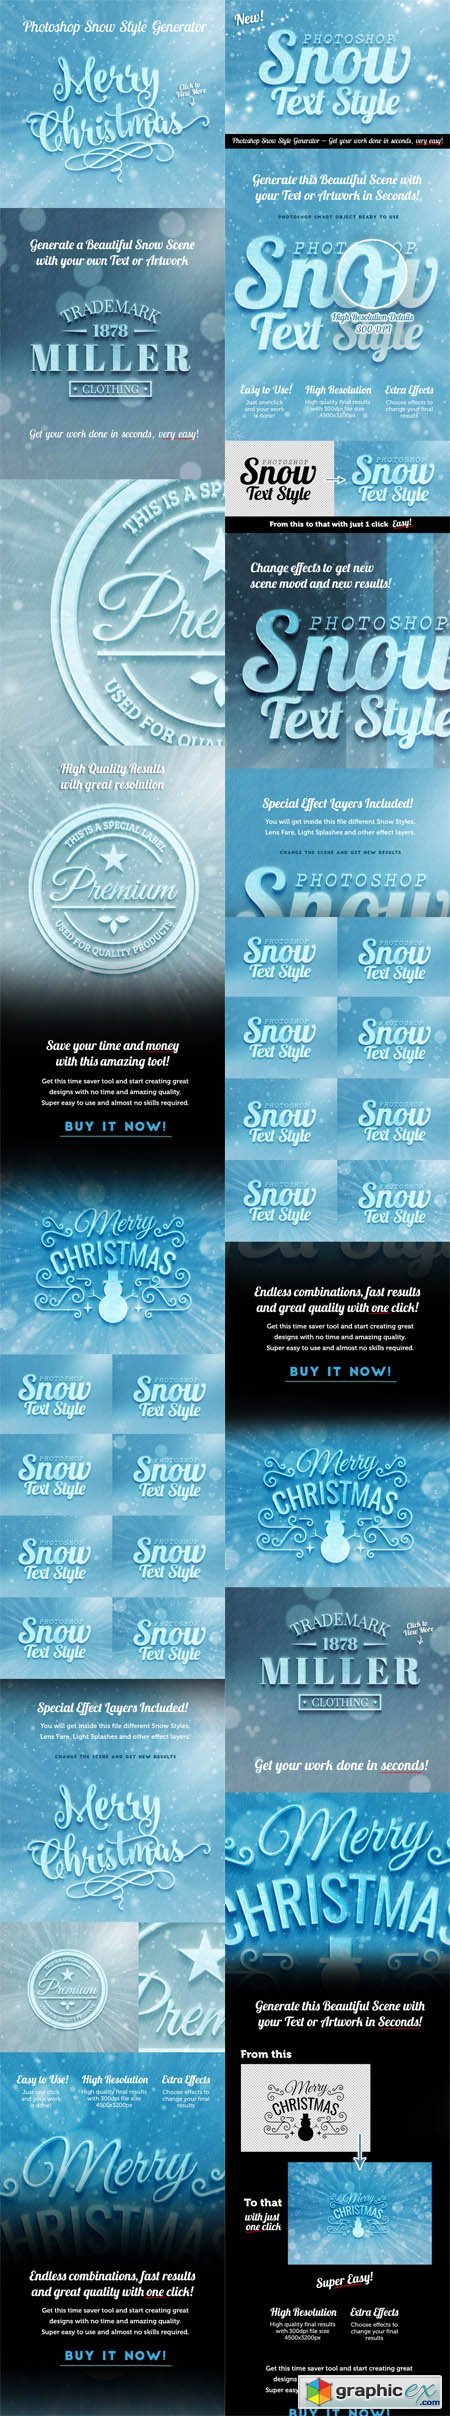 Snow Text Effect Psd for Photoshop